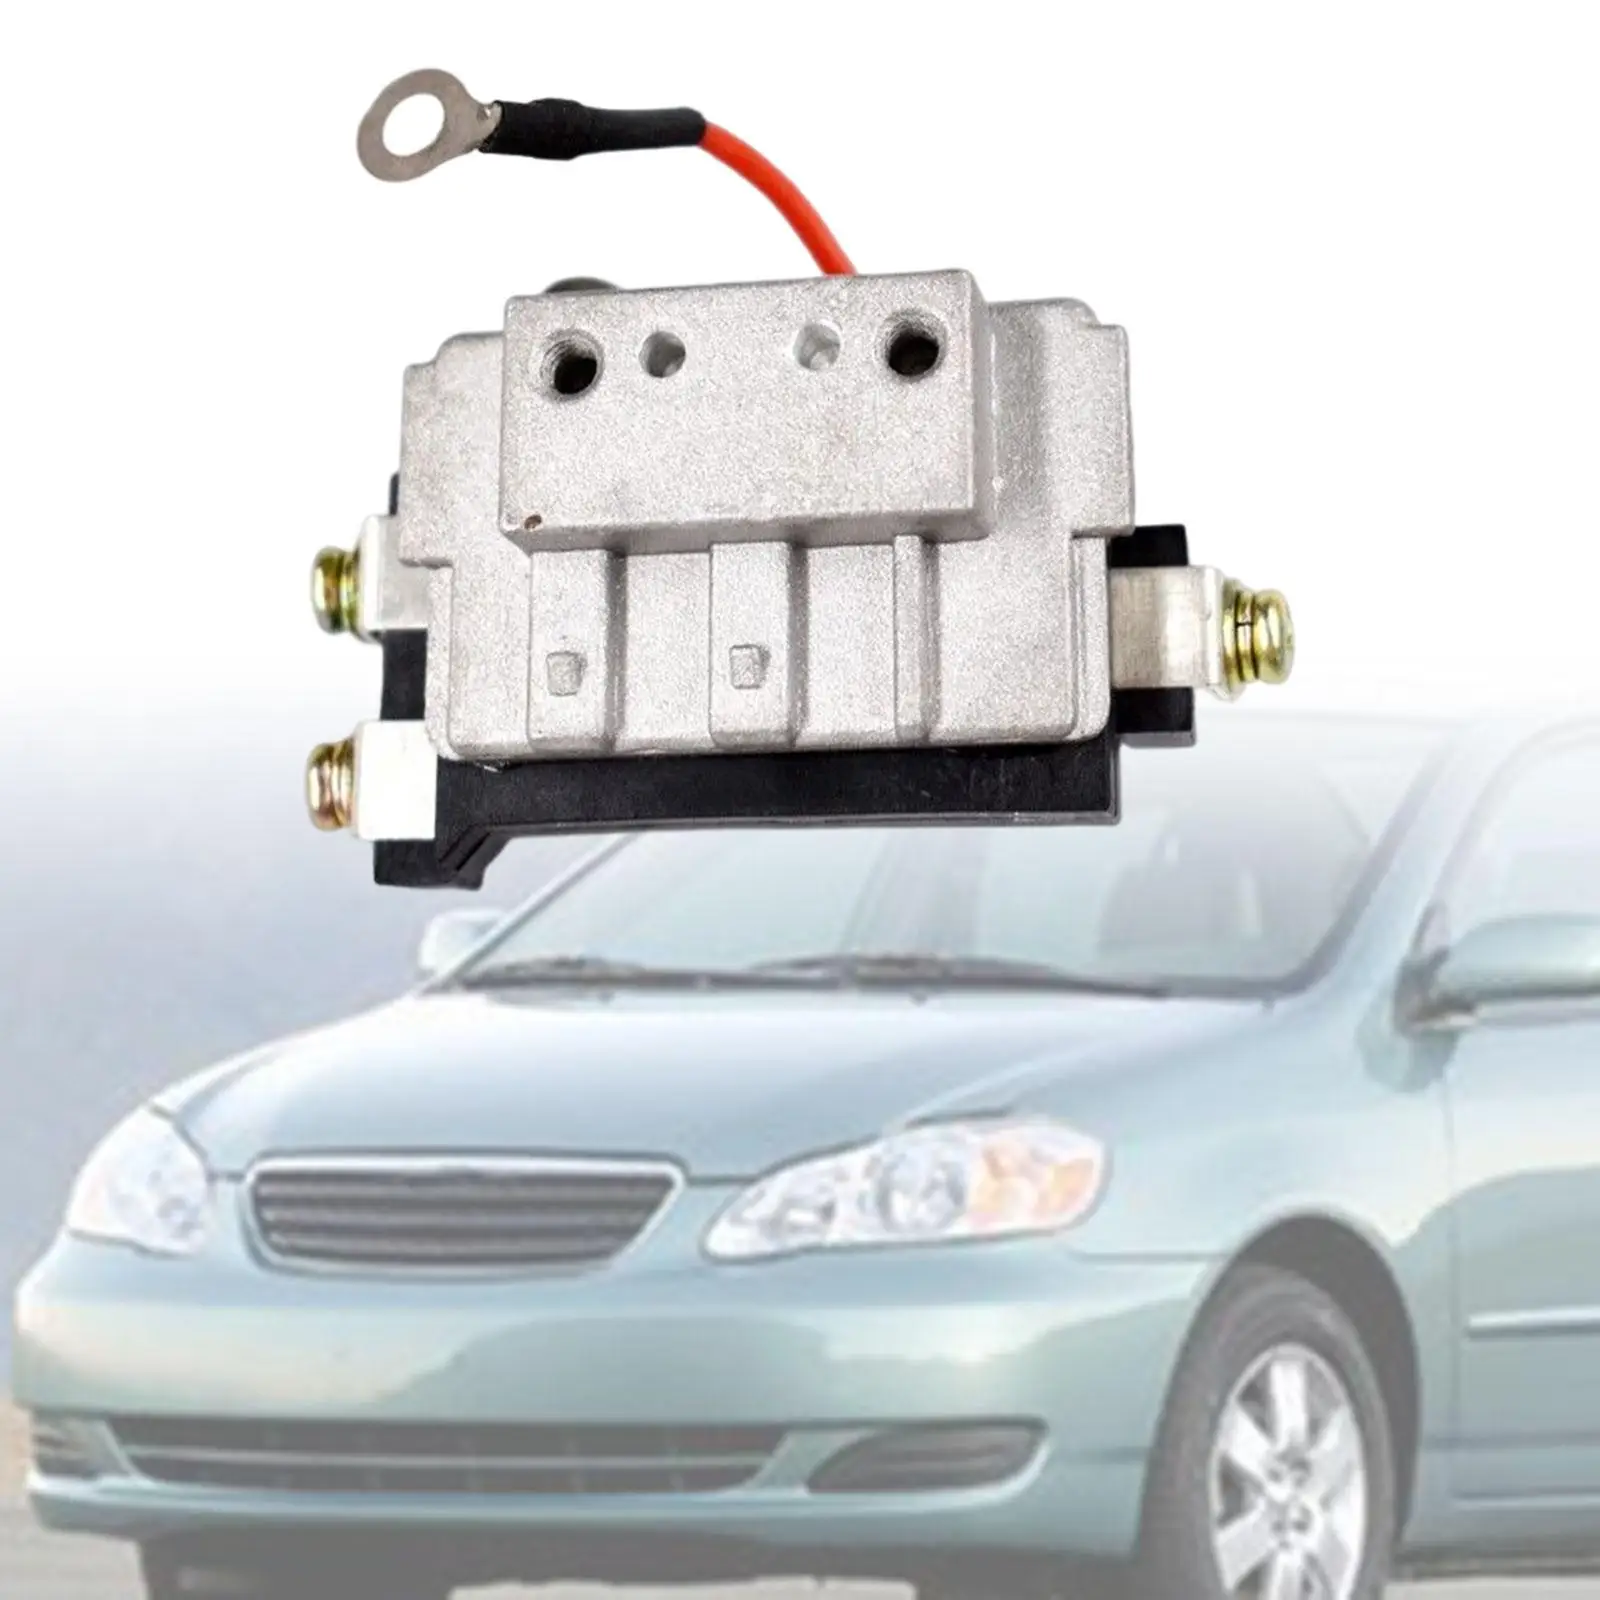 89620-12440, Ignition Module, Replaces, Accessories Durable Auto Motor Easy to Install Spare Parts Professional